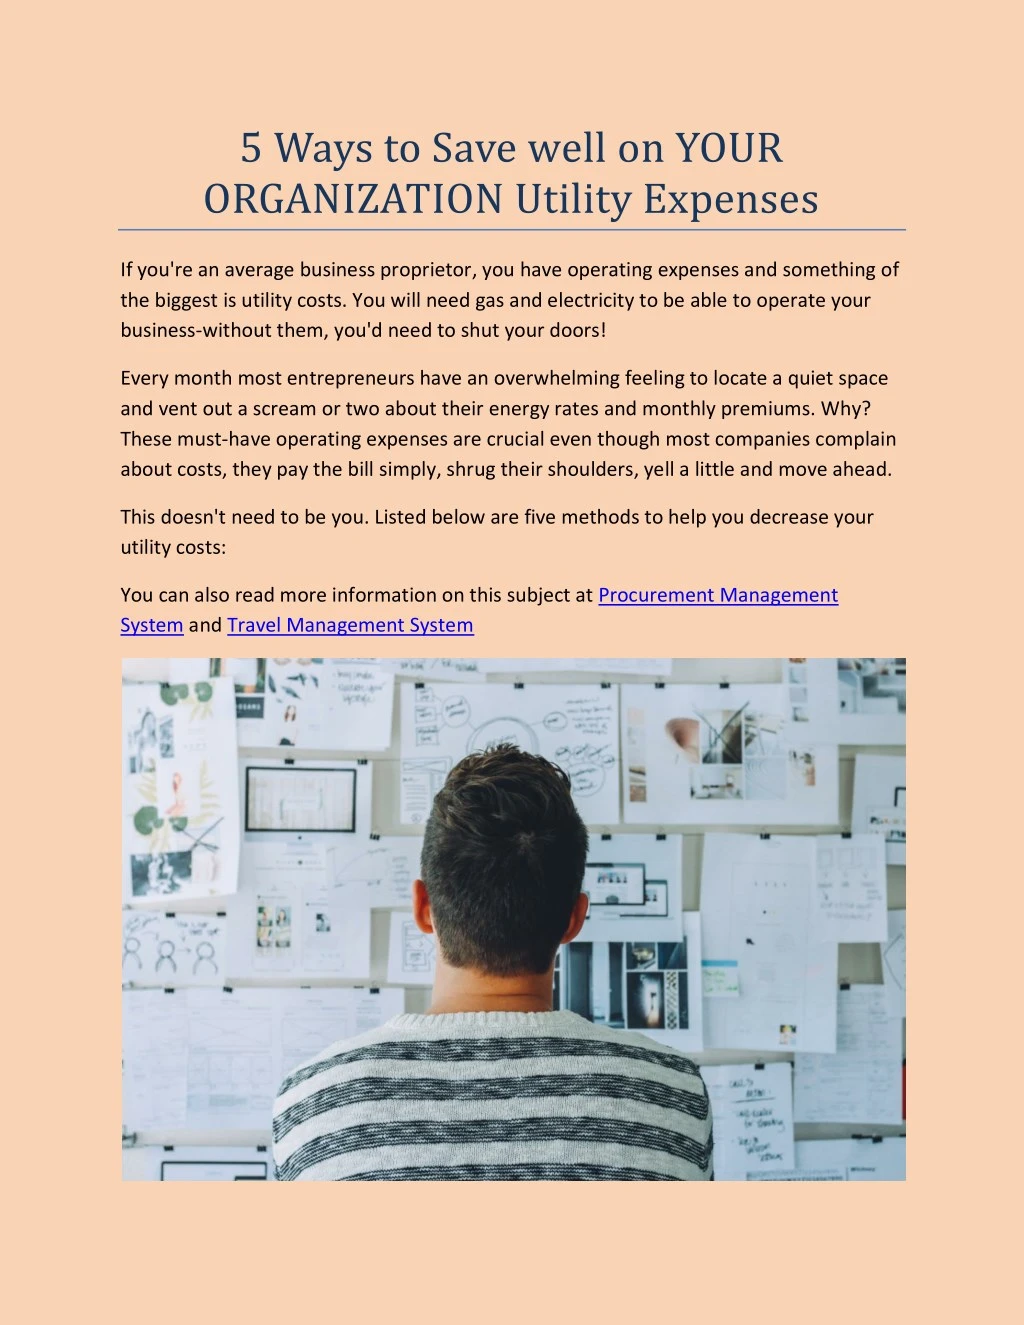 5 ways to save well on your organization utility